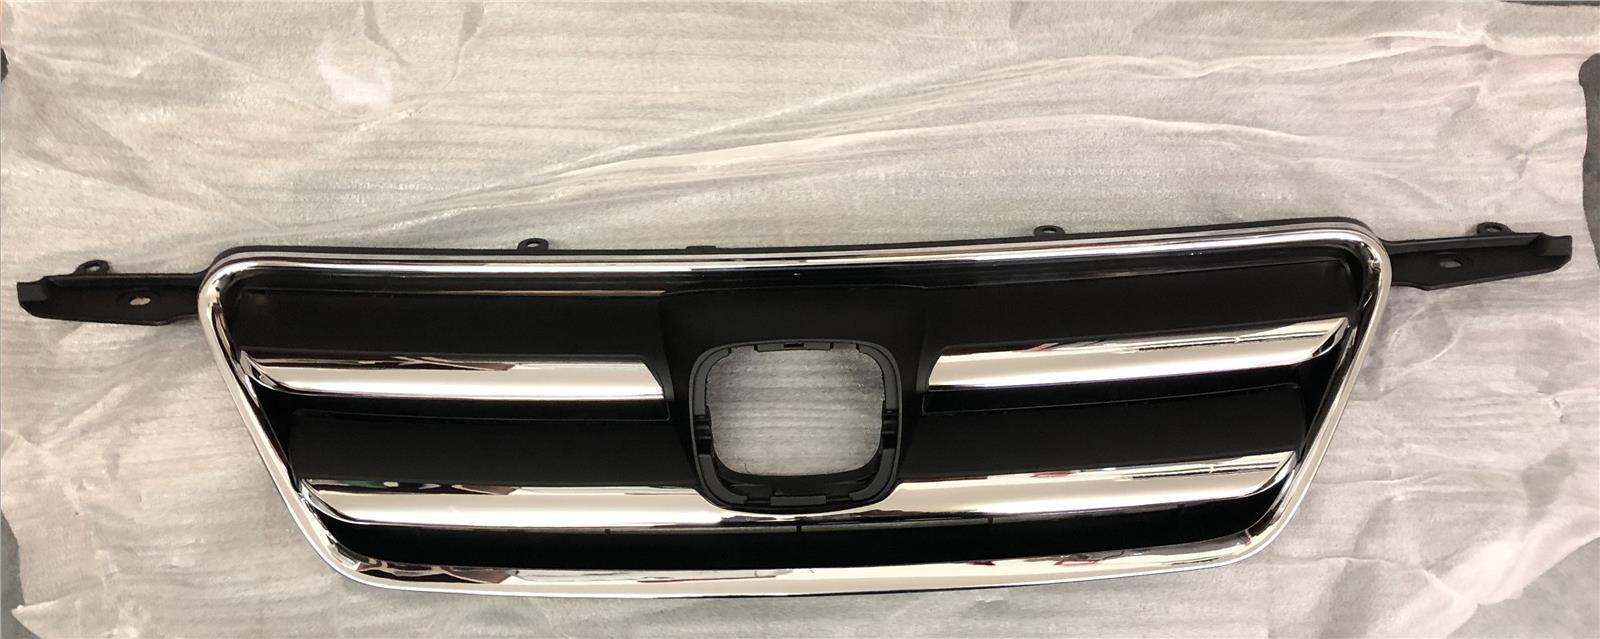 HONDA CRV 2005 2007 FRONT GRILLE WITH CHROME NO BADGE